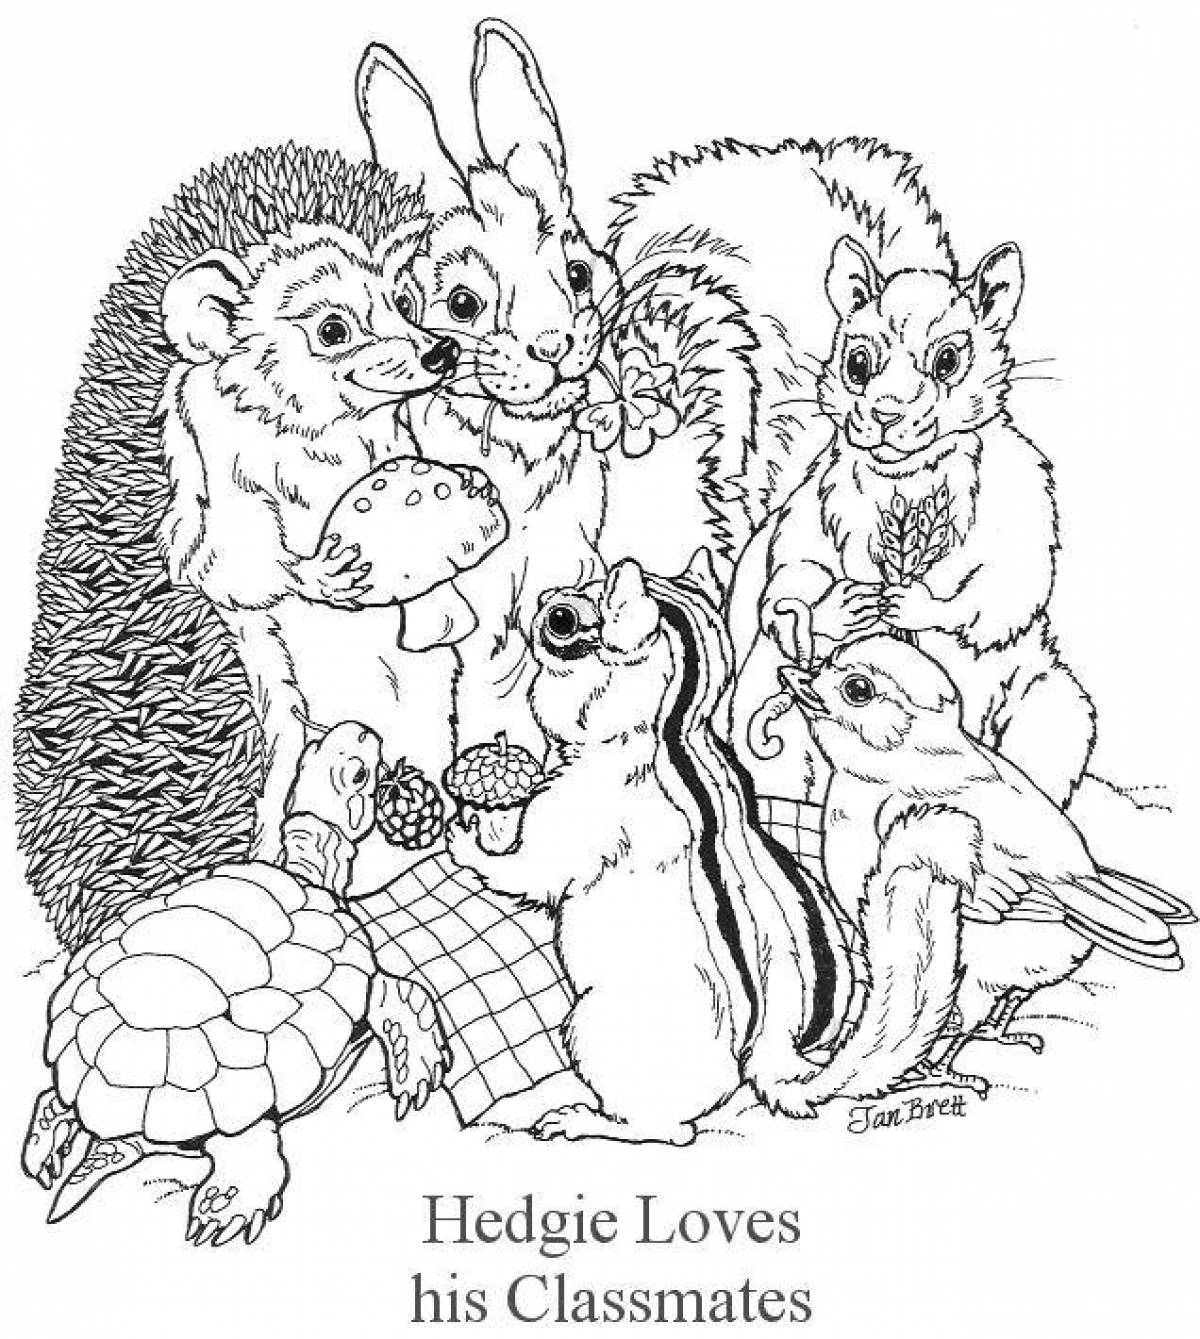 Highland forest animals coloring book